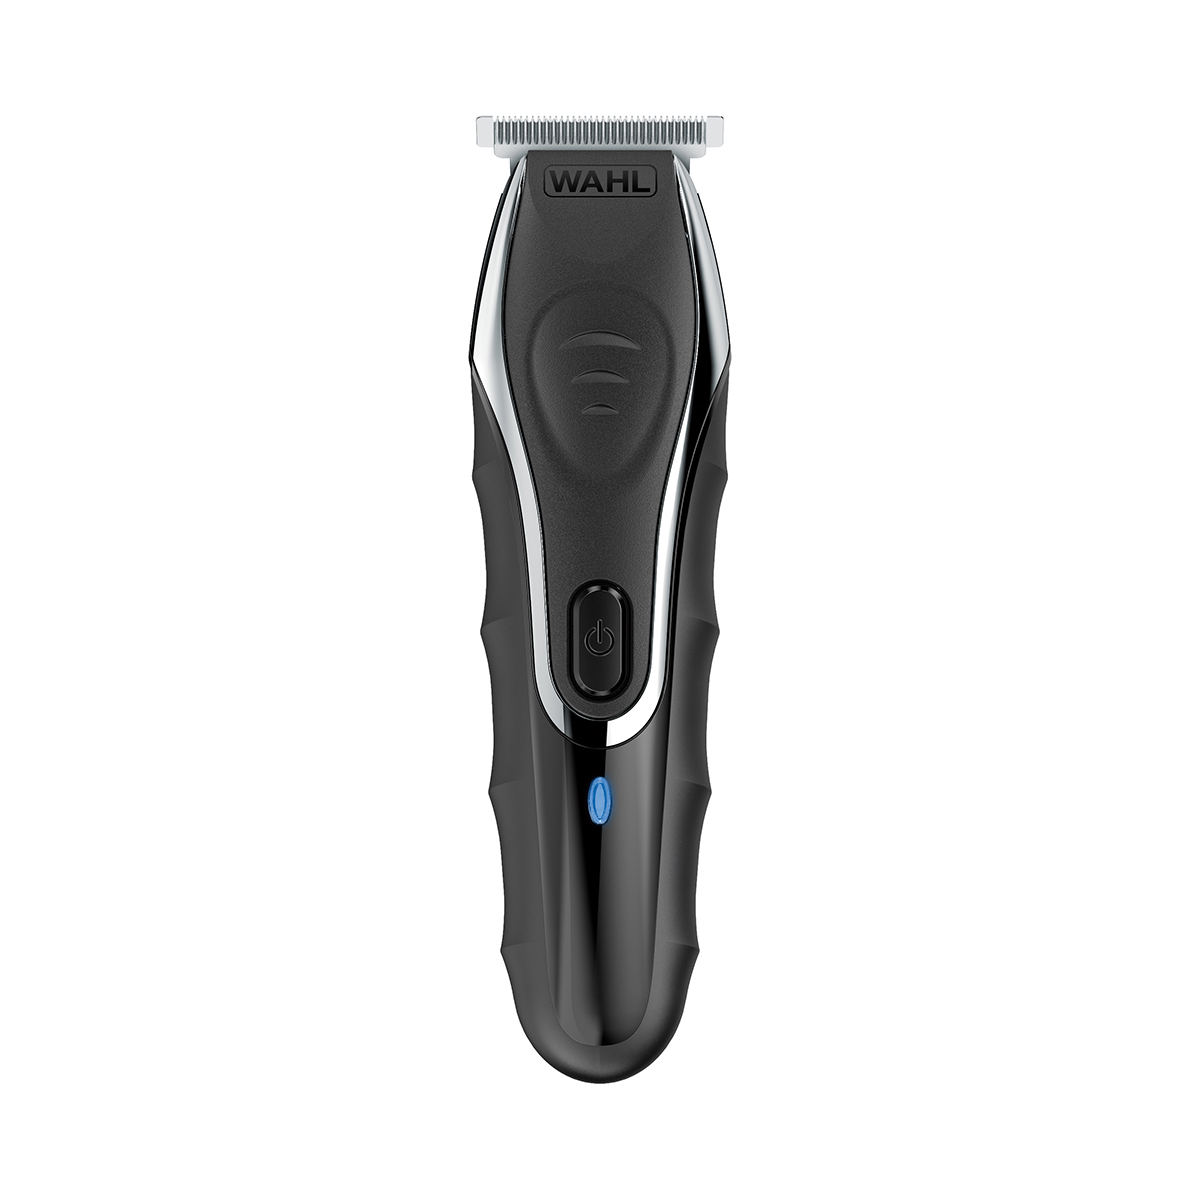 Product Listing | Global Wahl